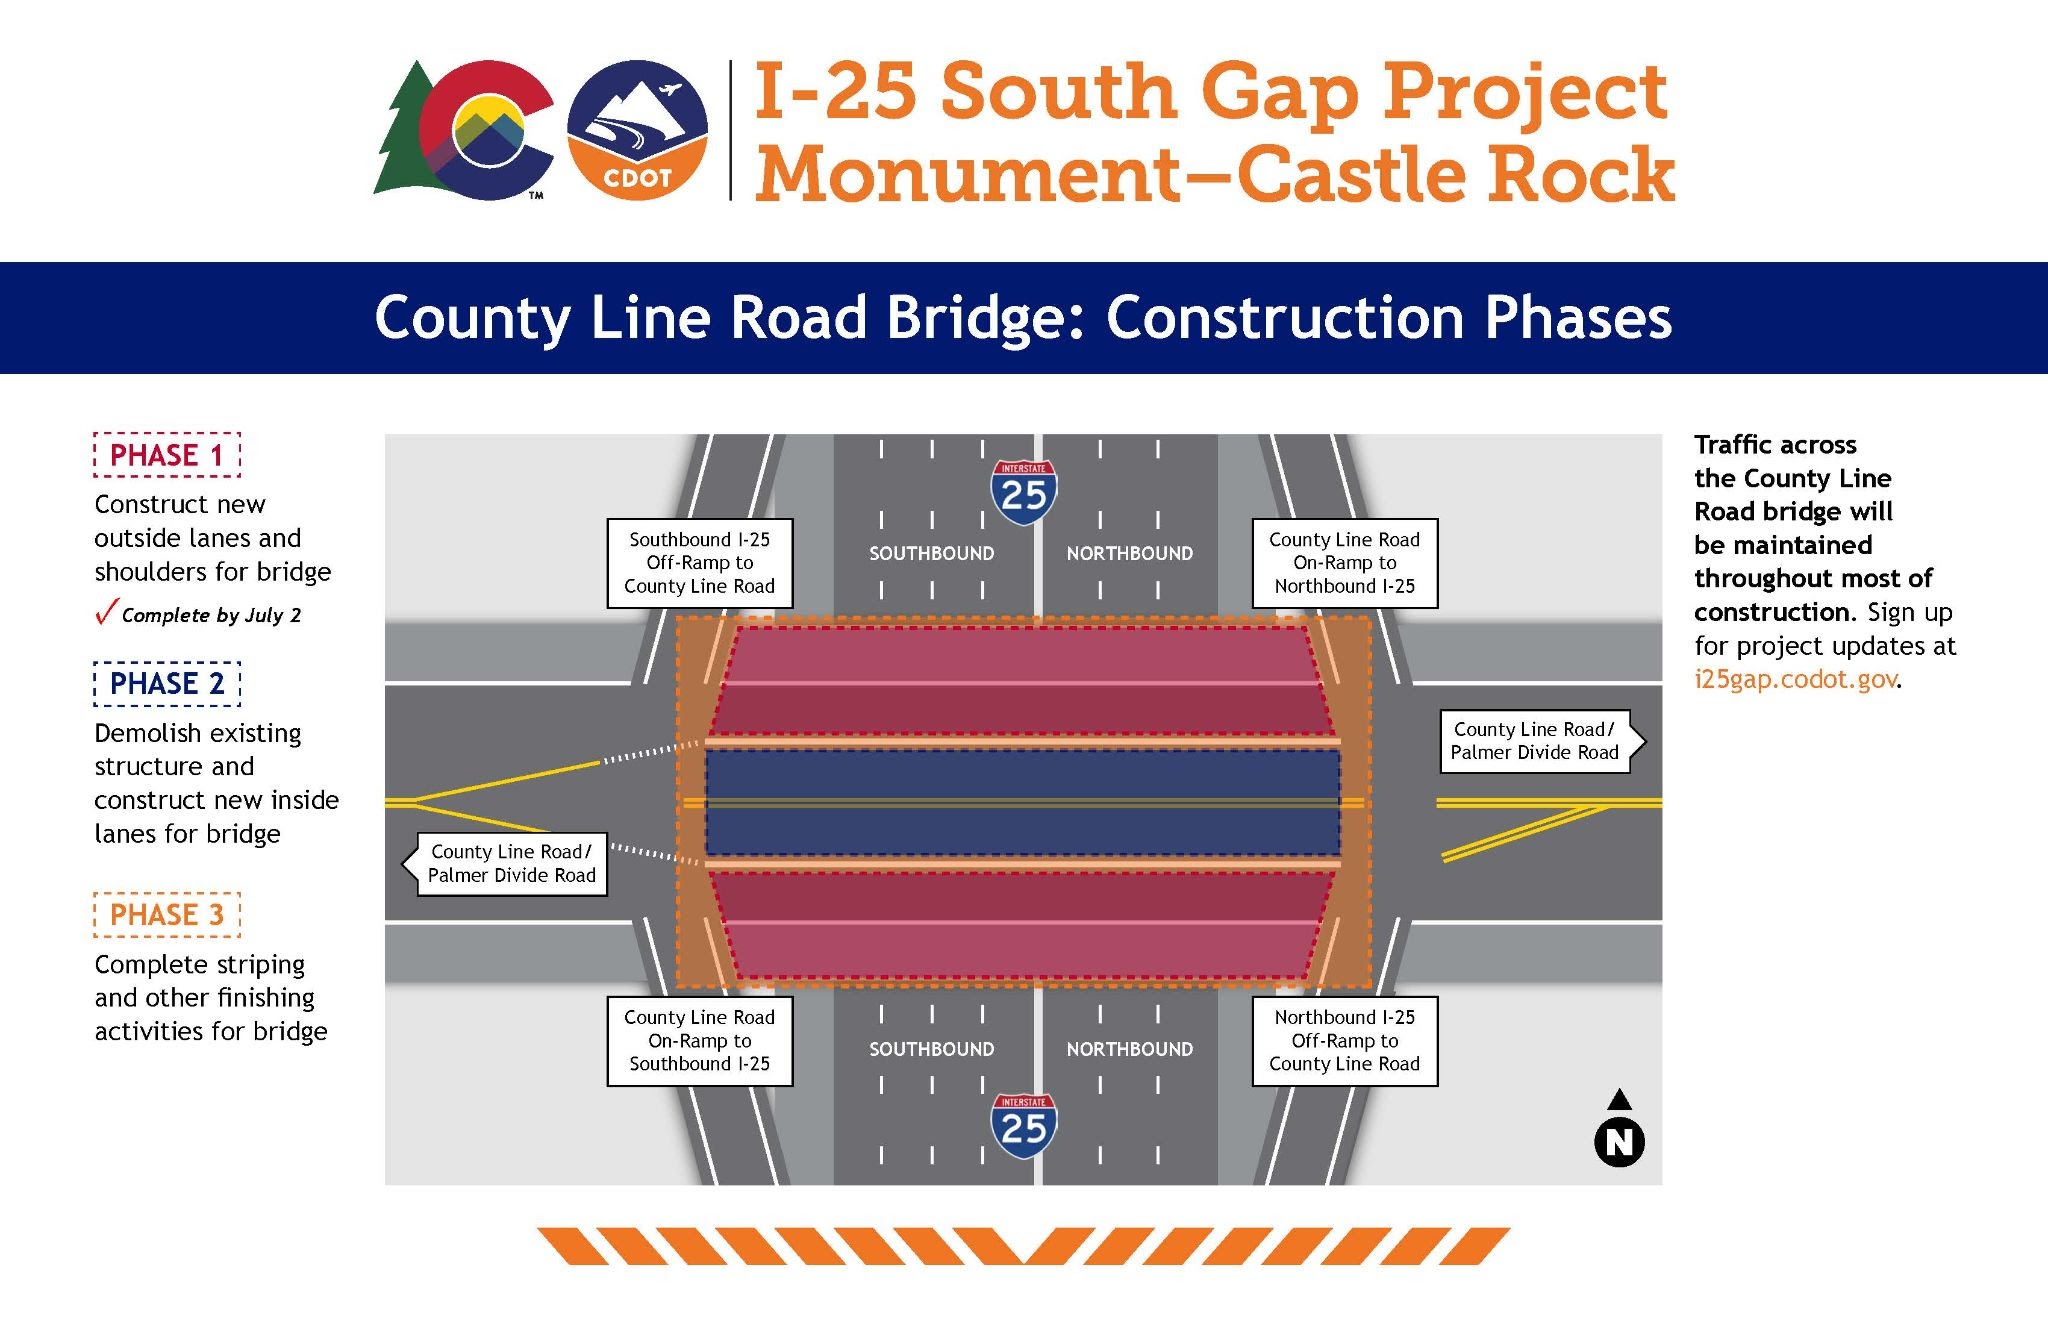 County Line Road Bridge: Construction Phases for the I-25 South Gap project graphic detail image